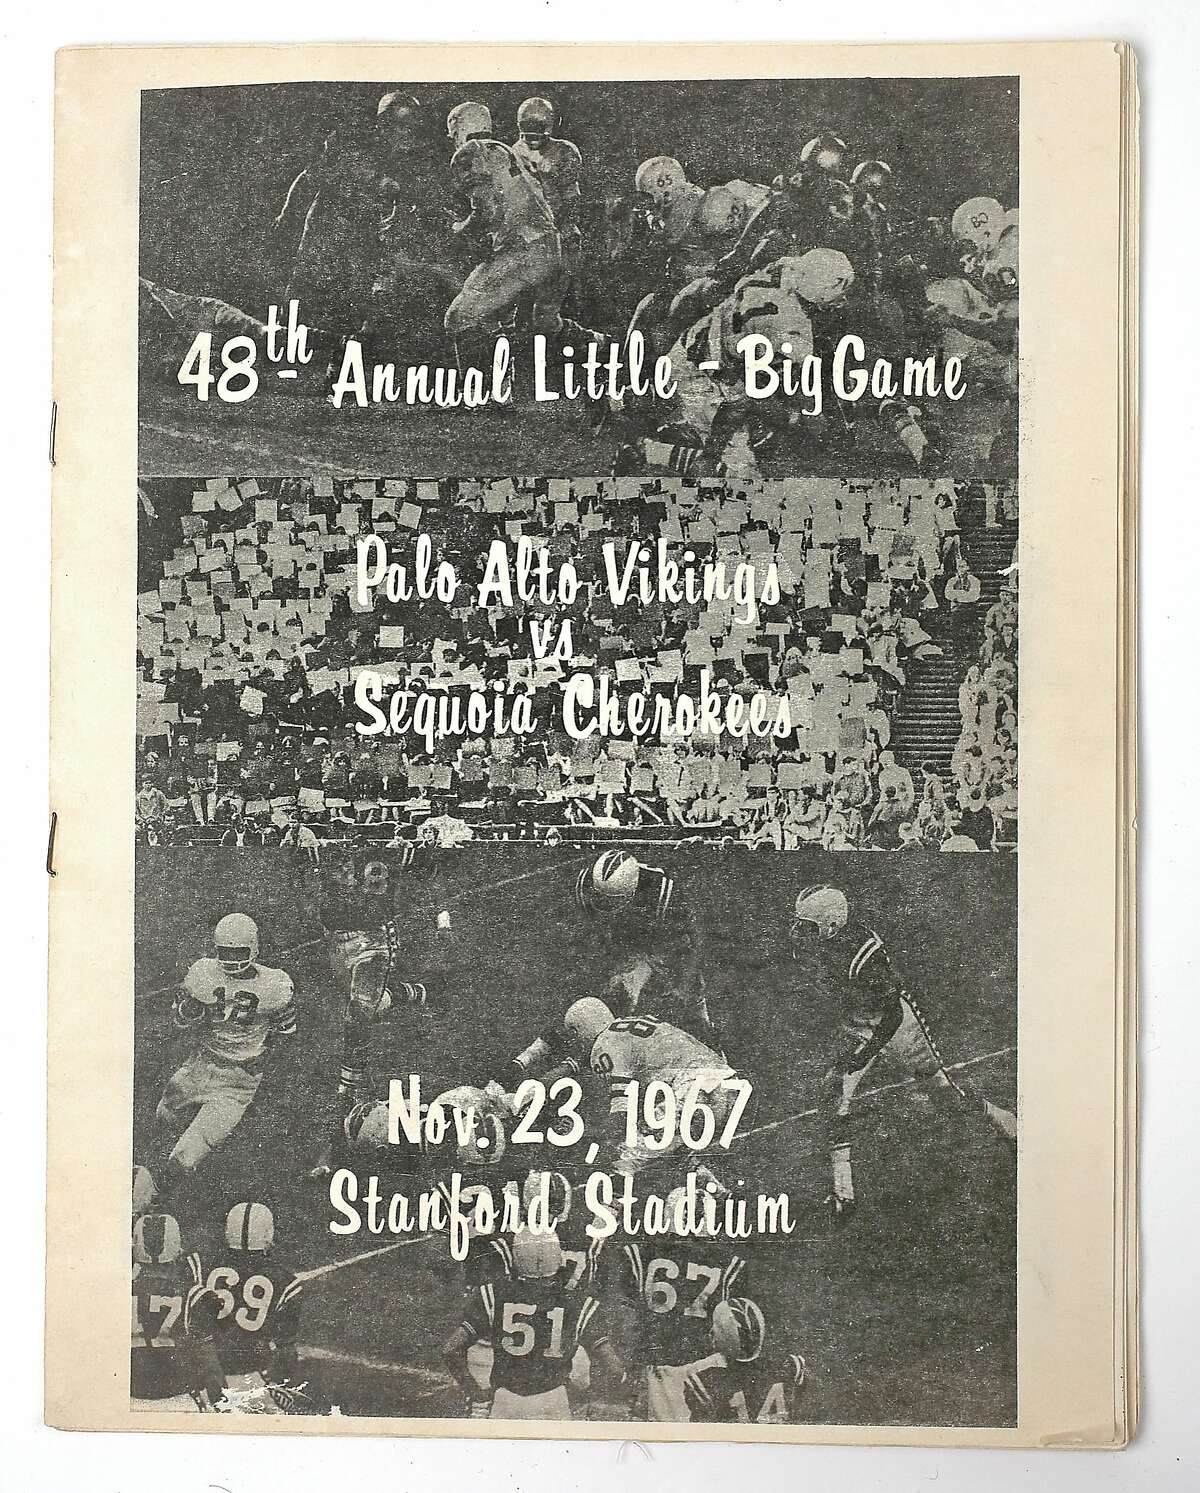 This program was designed and printed by the graphic arts department at Palo Alto High School for the 1967 Little Big Game between Sequoia and Palo Alto.